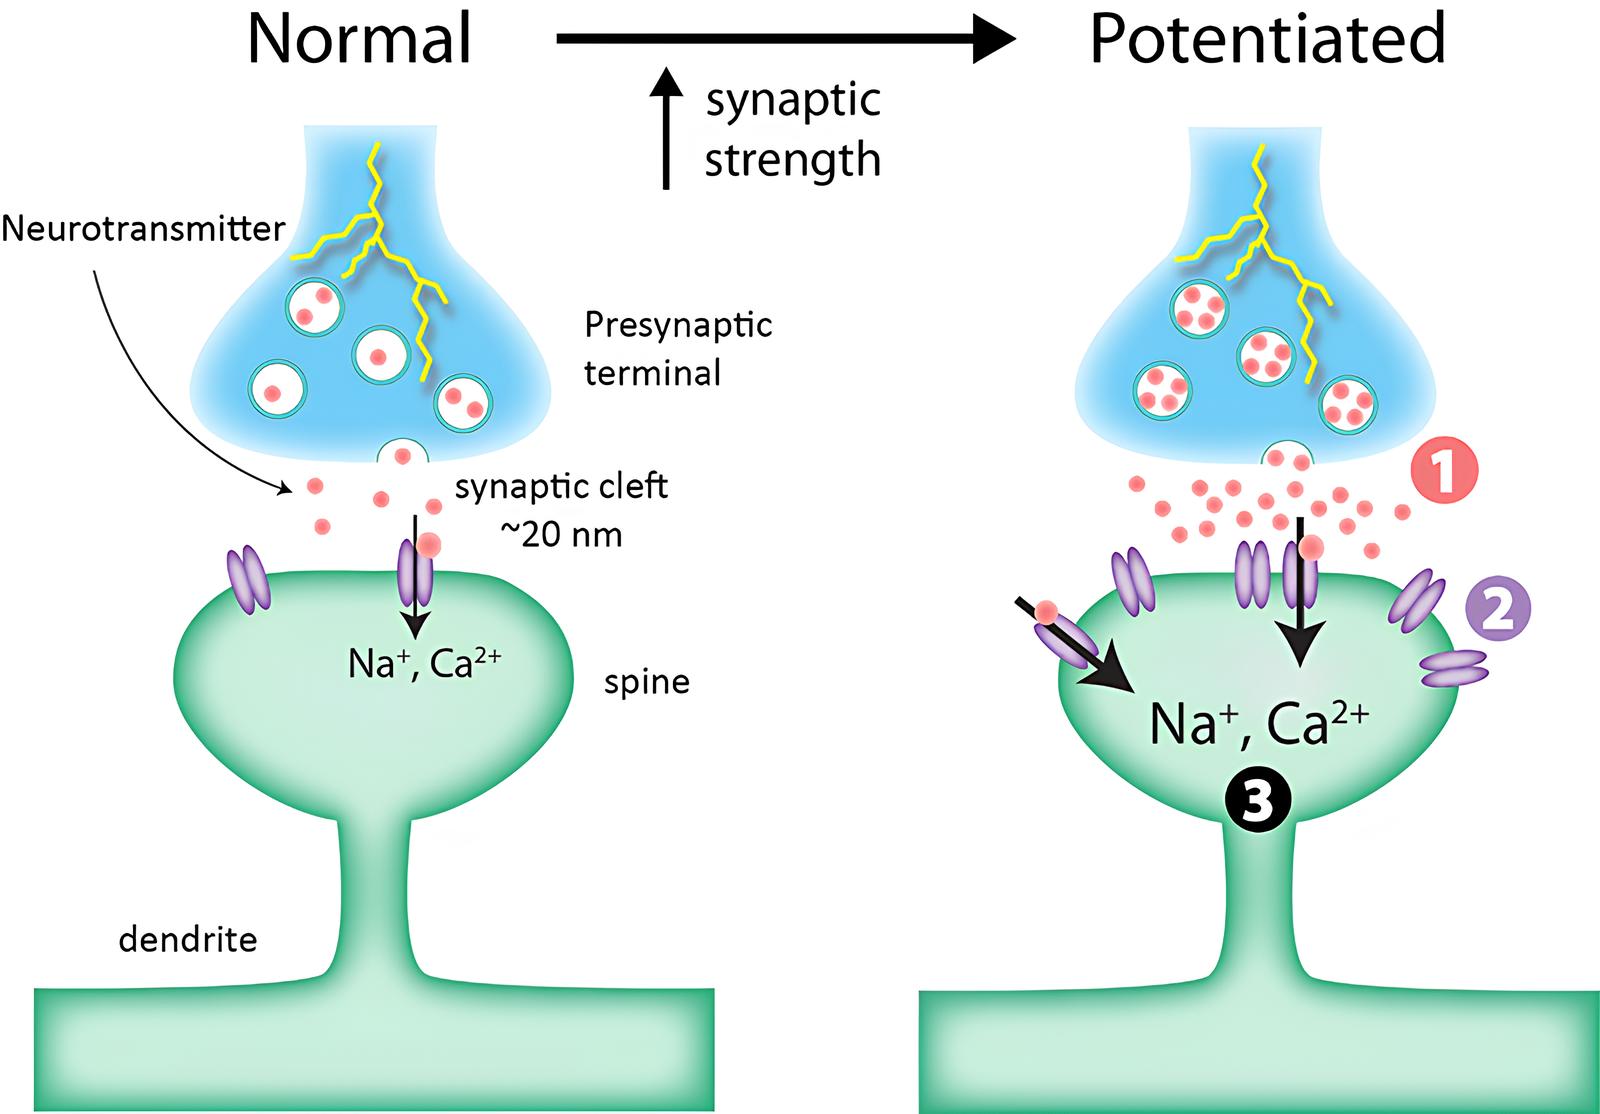 Synaptic plasticity can change either the amount of neurotransmitter released (1) or the number of postsynaptic receptors available (2), resulting in changes in synaptic strength.